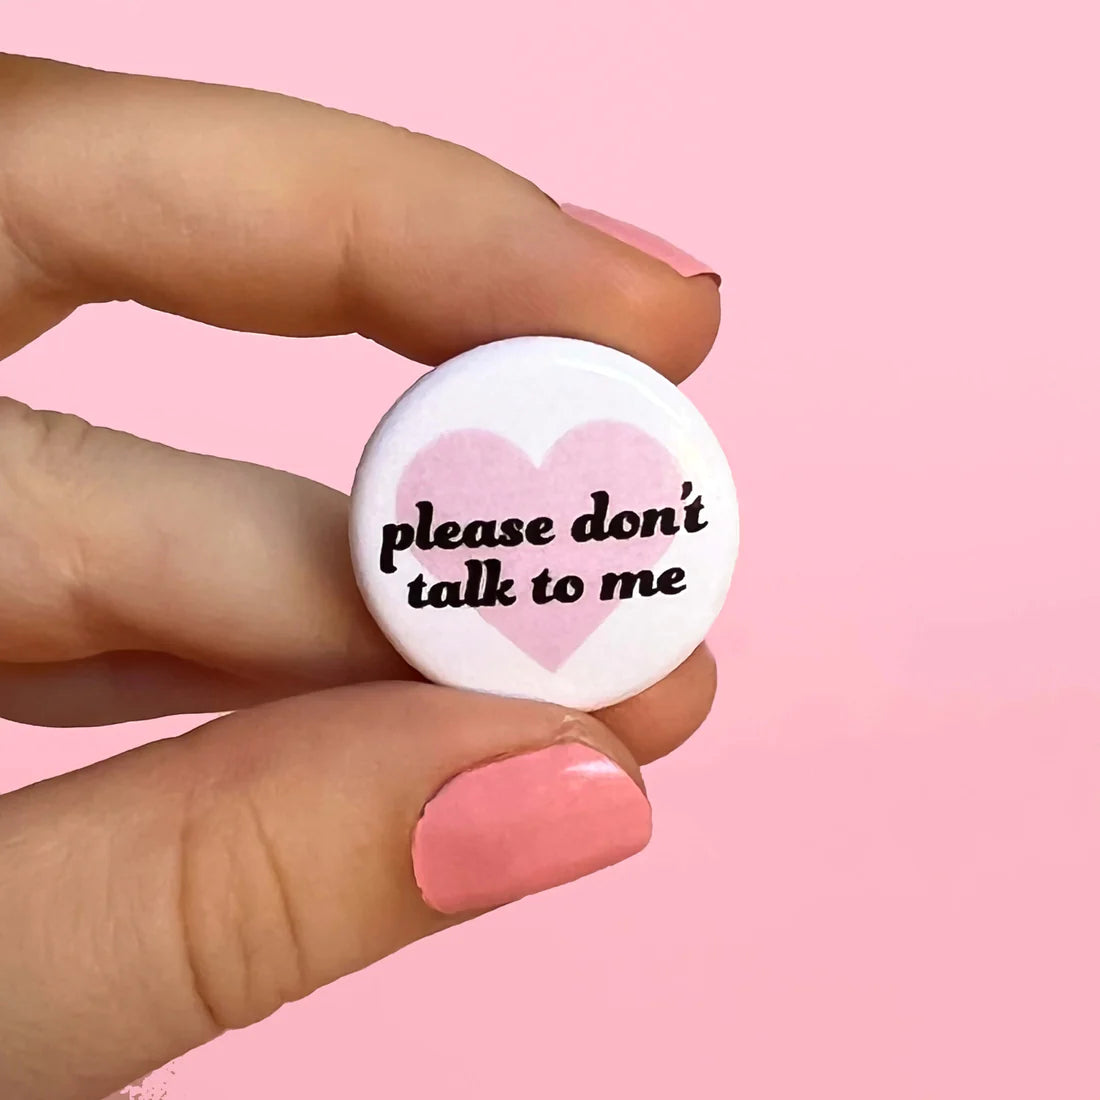 Bitch Next Door "Please Don't Talk To Me" pin